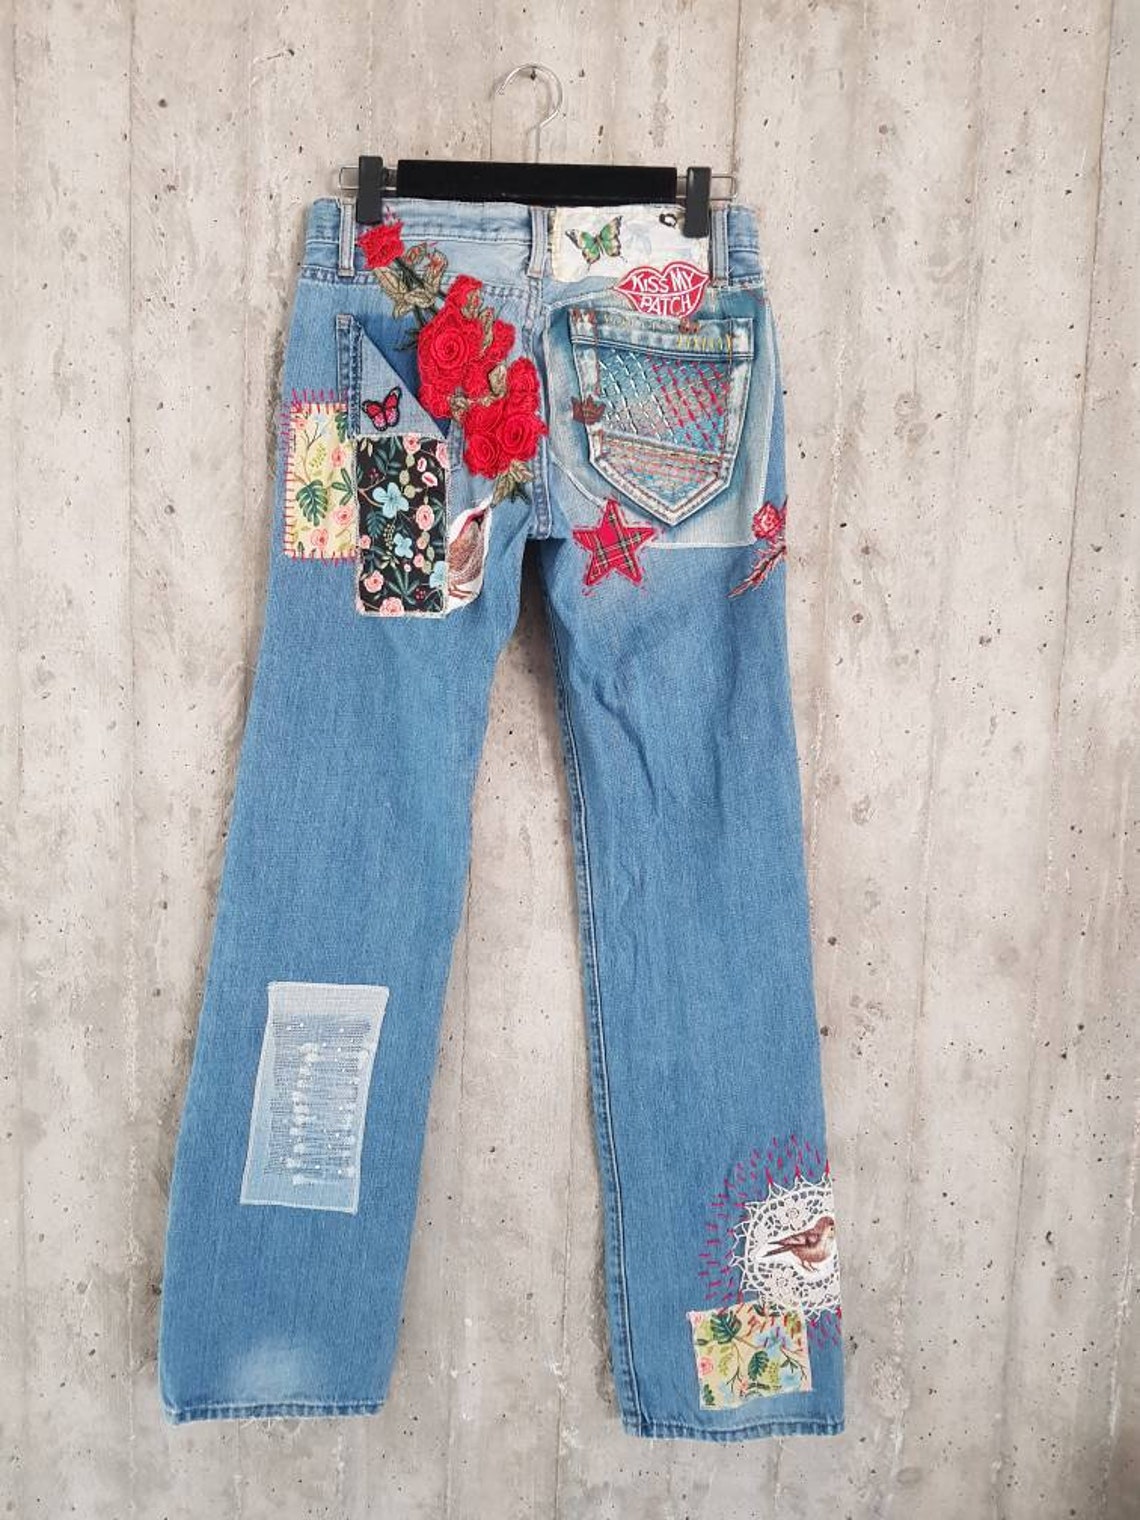 Hand made Patched Denim embowered slime Jeans / Reworked | Etsy